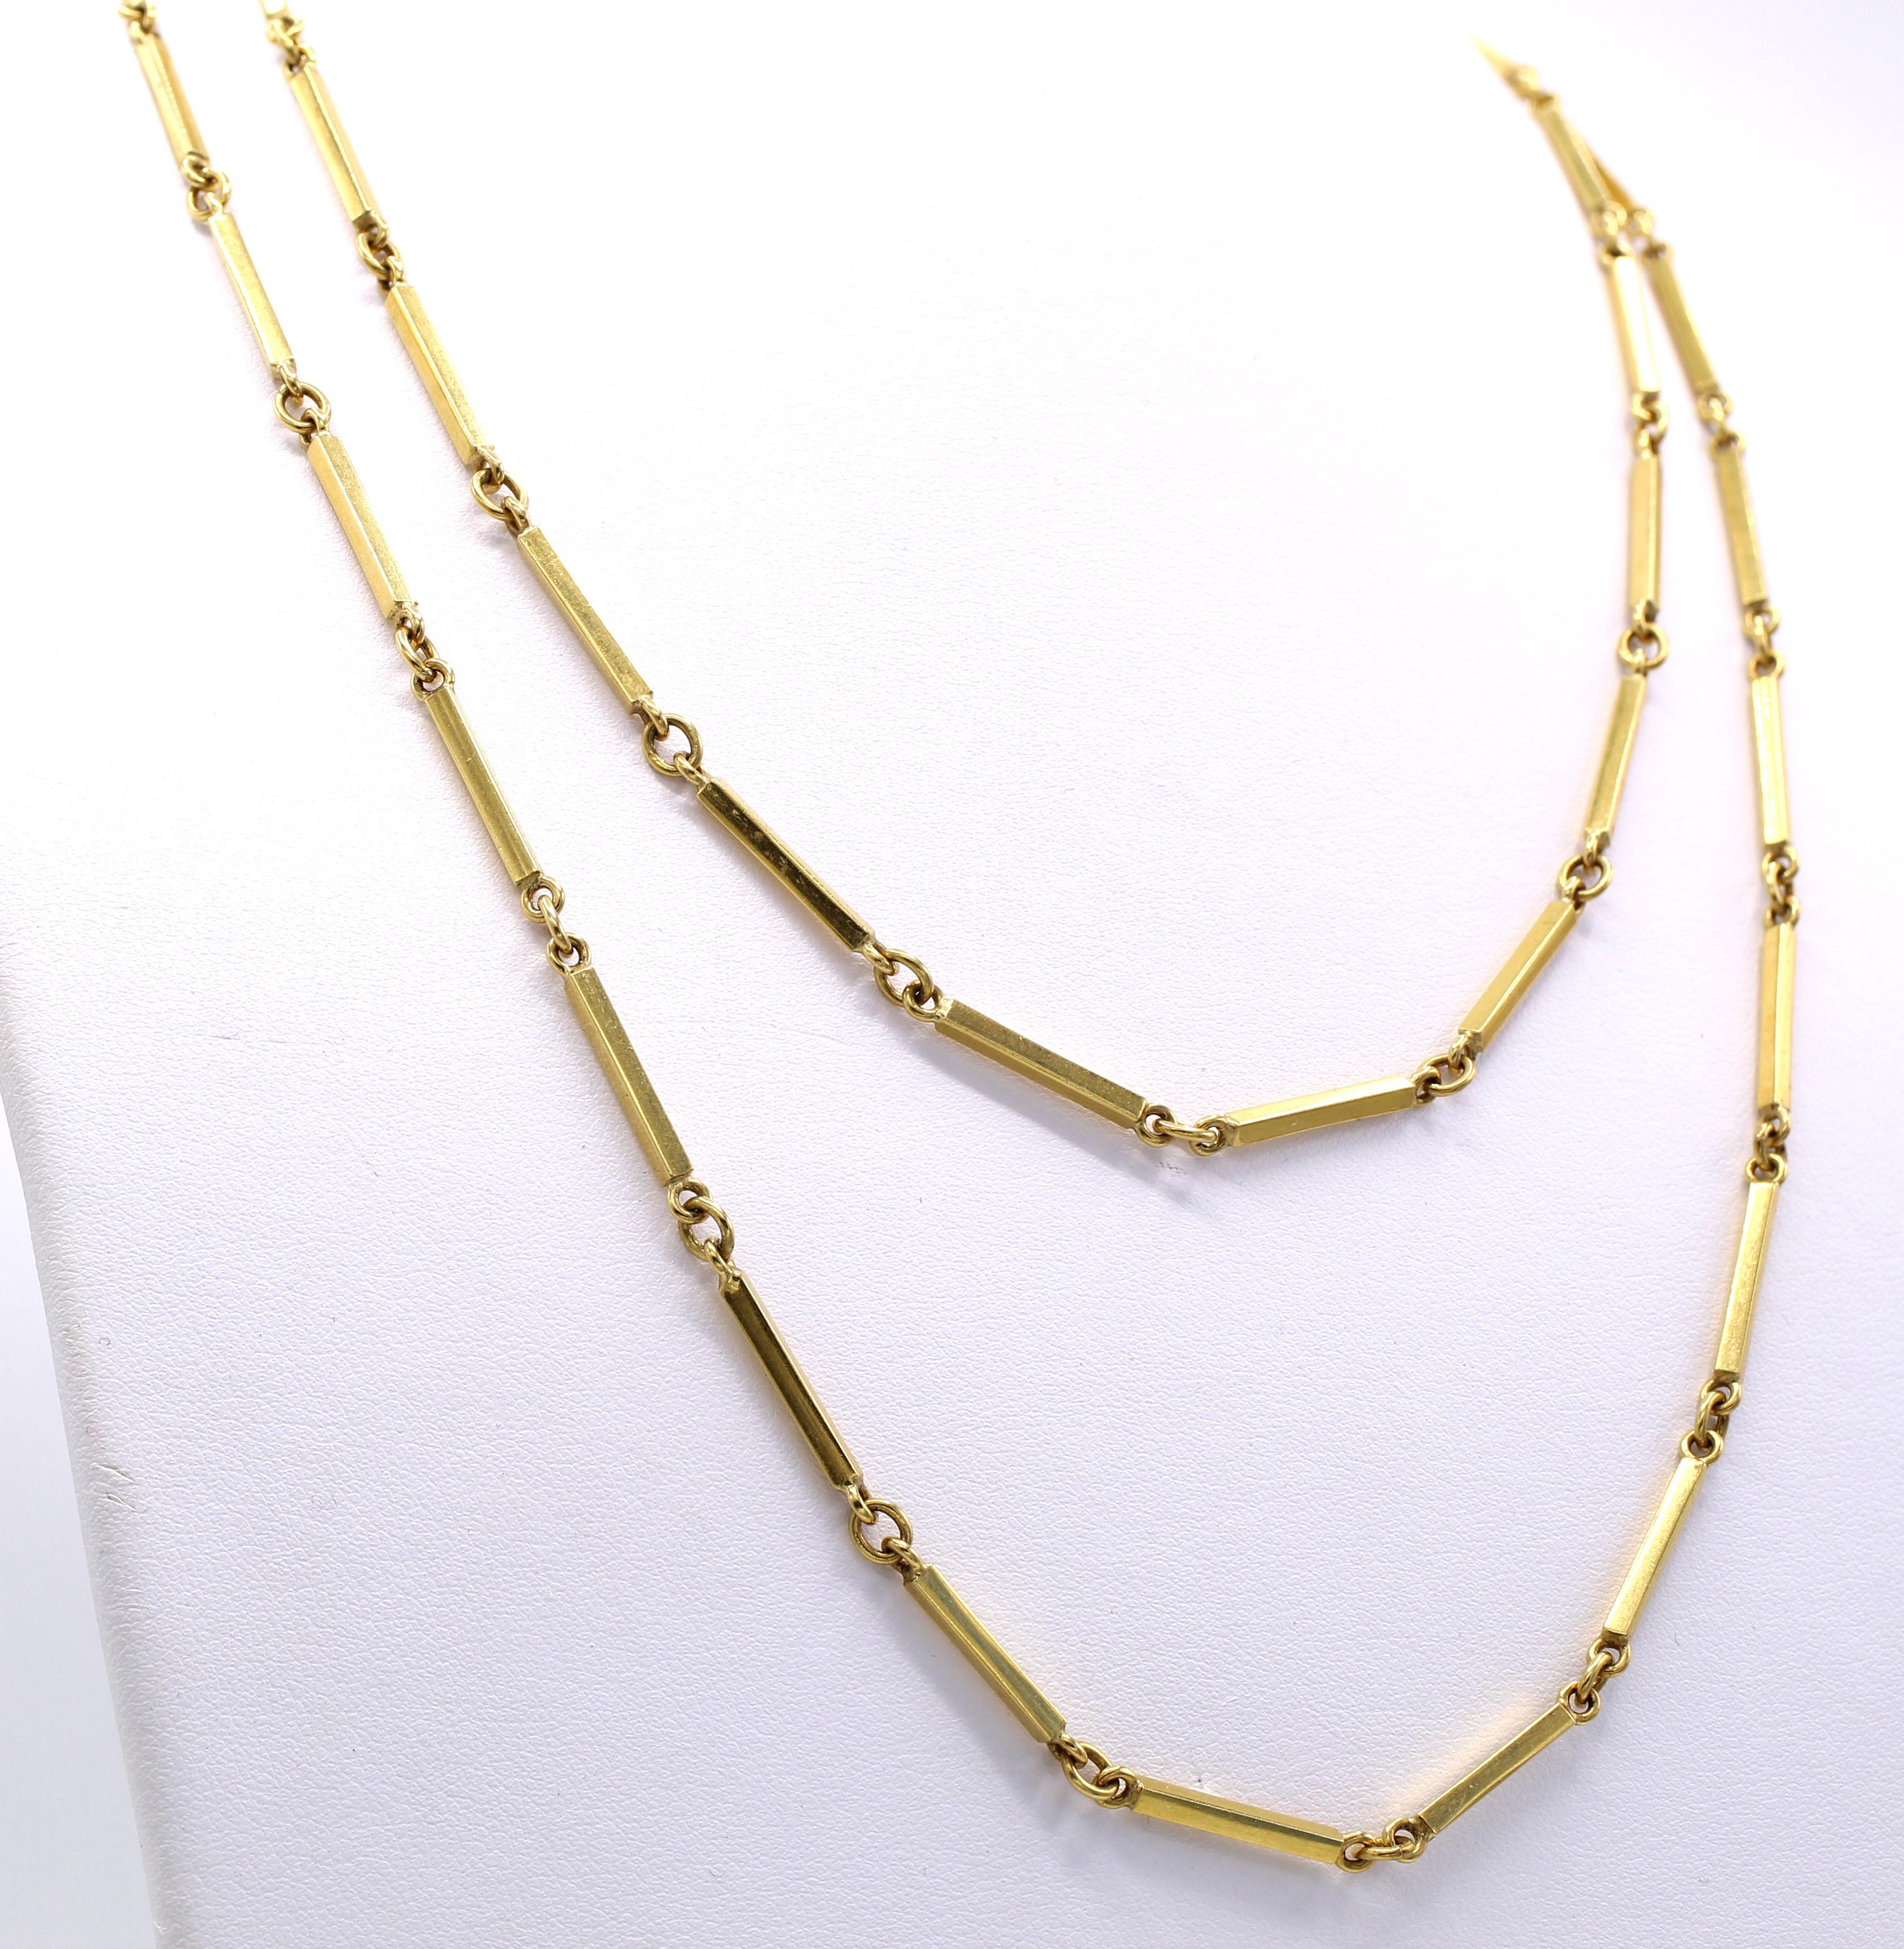 Beautifully 1980s 18 karat yellow gold long chain necklace. Measuring 39.5 inches in length it can be casually worn at full length or doubled up as a choker. Elongated rectangular bar links are flexibly connected to oval rings letting the bars turn